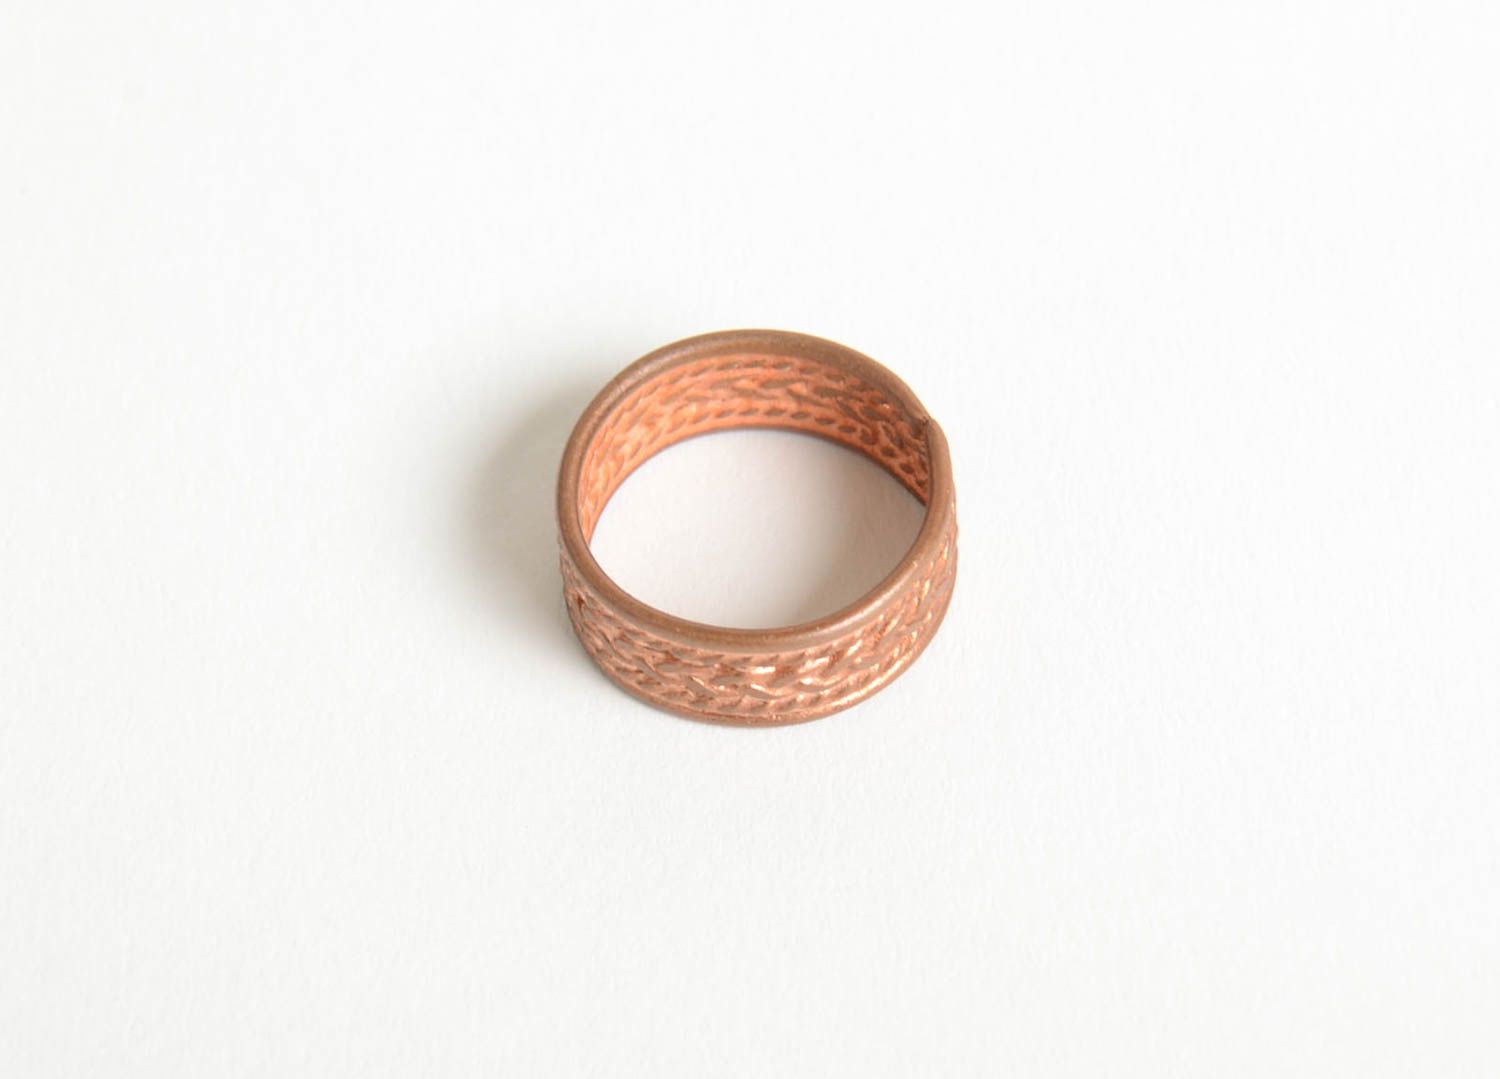 Stylish handmade copper ring metal ring design accessories for girls gift ideas photo 5